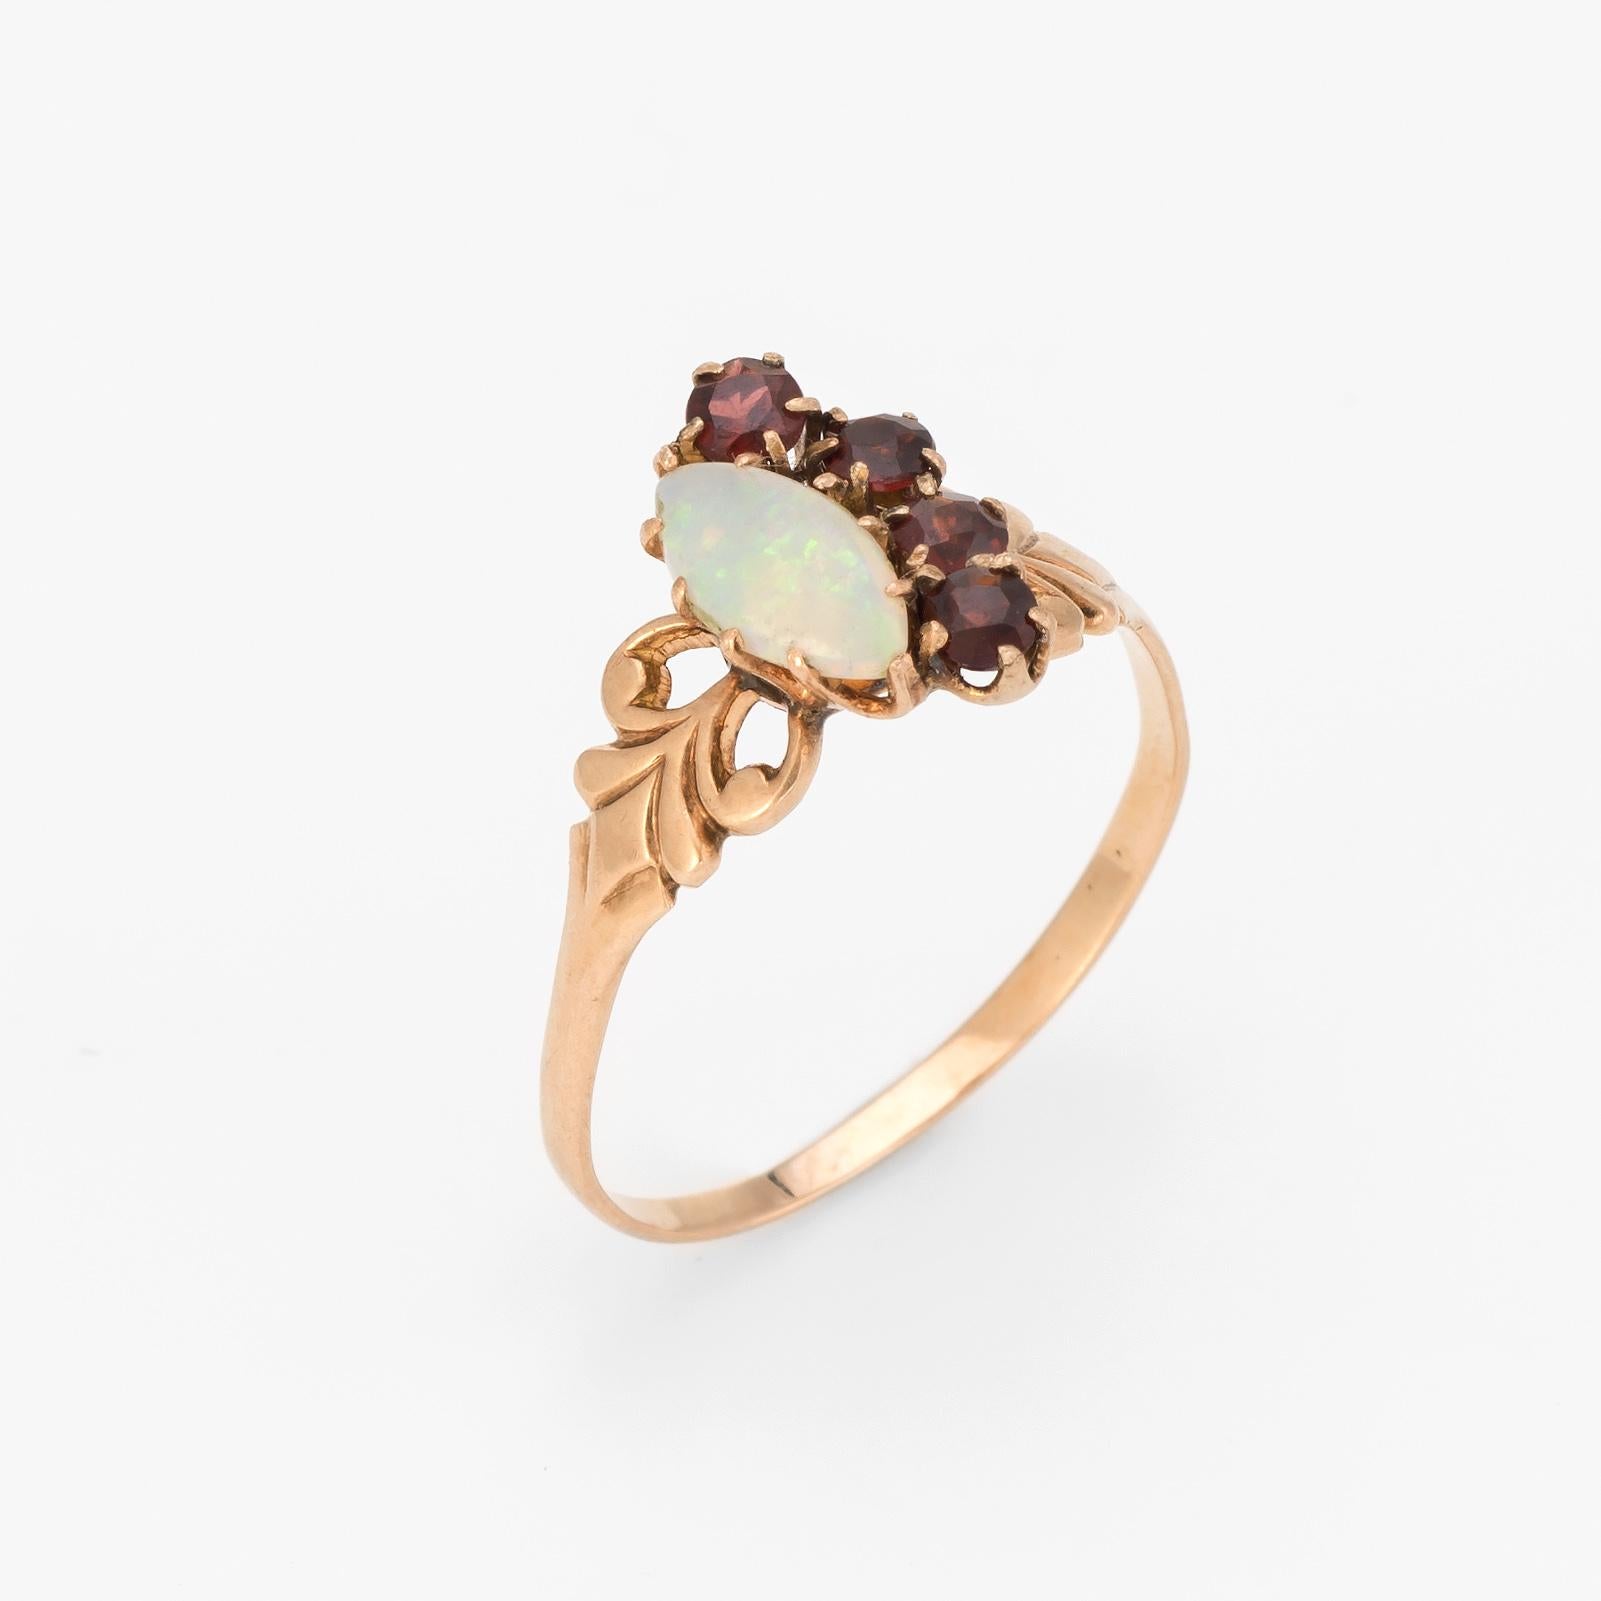 Finely detailed antique Victorian garnet & opal ring (circa 1880s to 1900s), crafted in 10 karat rose gold. 

Four garnets are estimated at 0.06 carats each (0.24 carats total estimated weight), accented with a natural opal that measures 8mm x 4mm